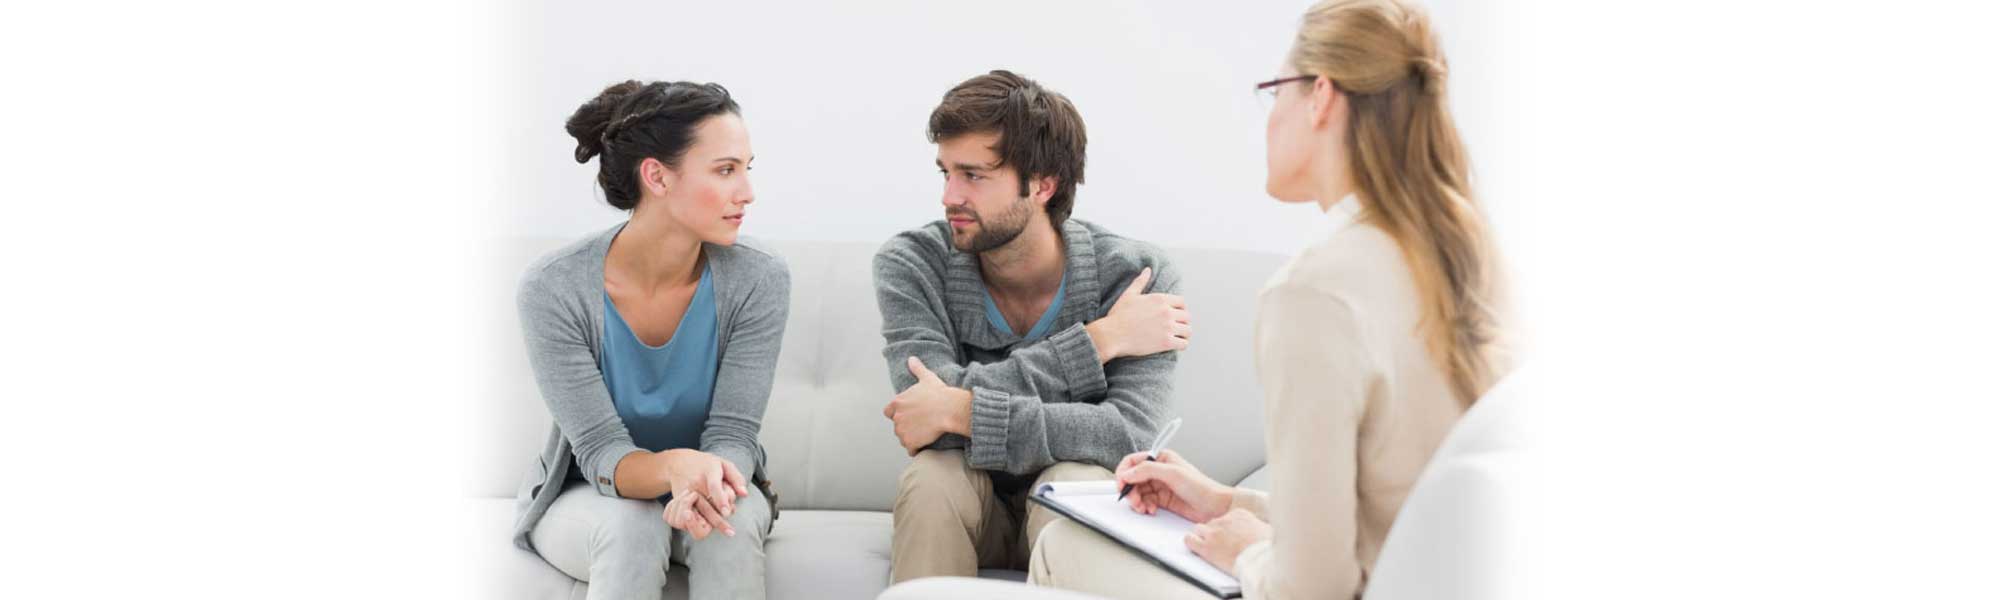 mediation services in south east